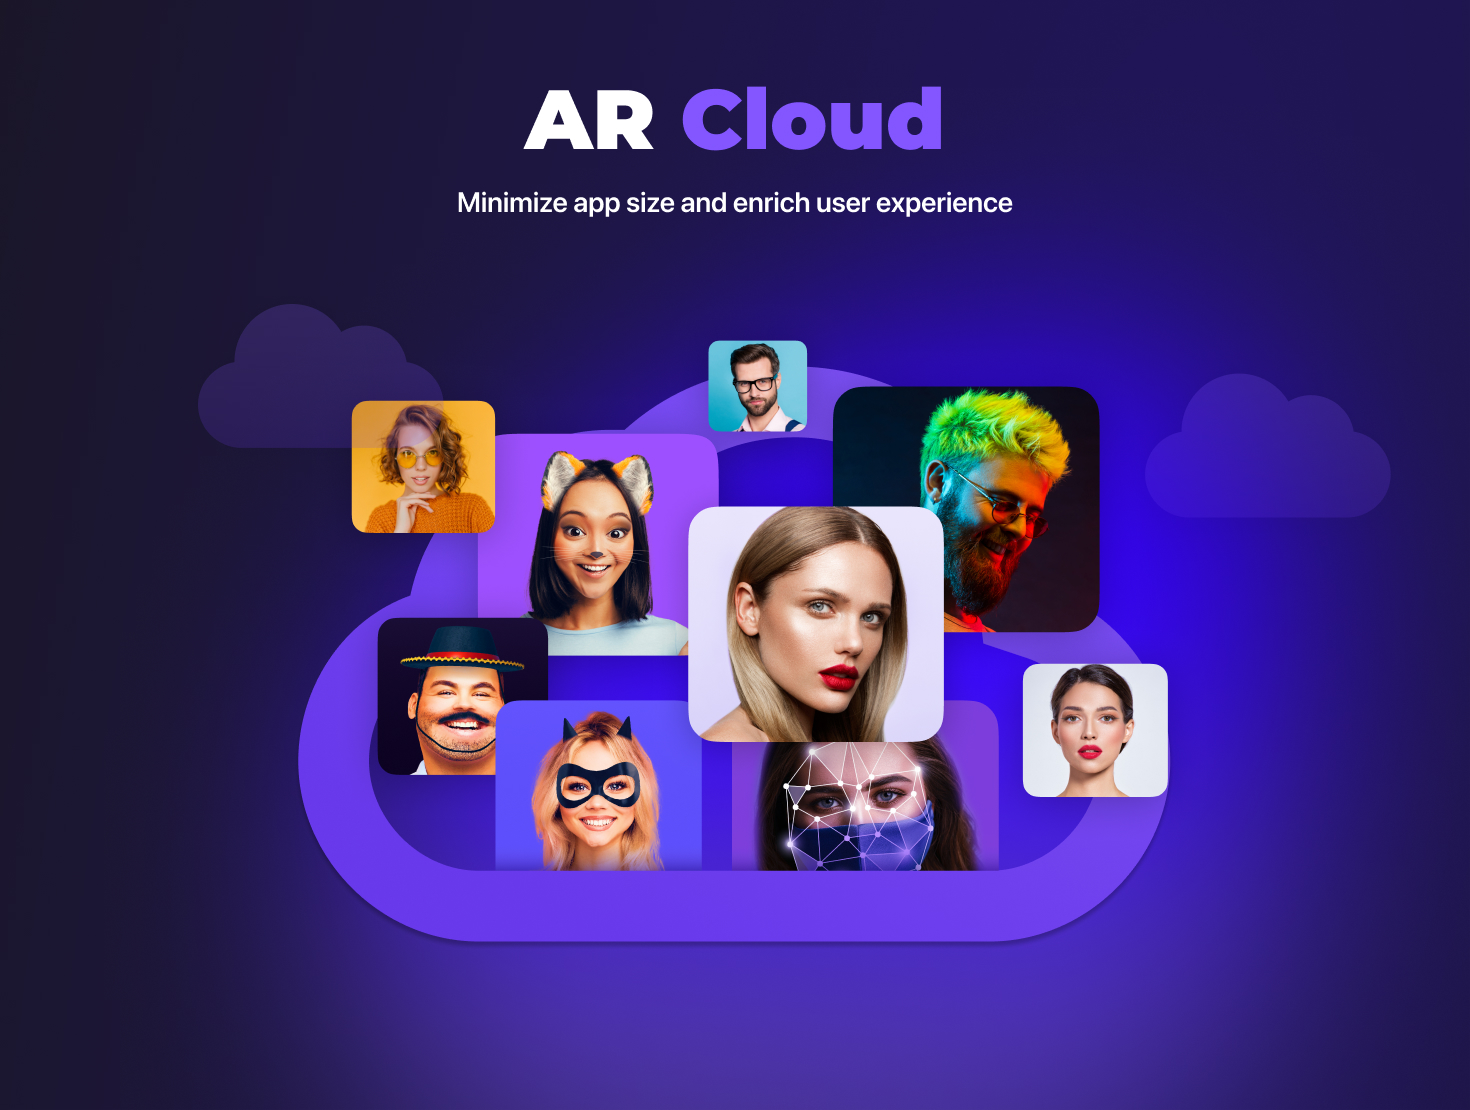 AR Cloud to minimize app size and enrich user experience